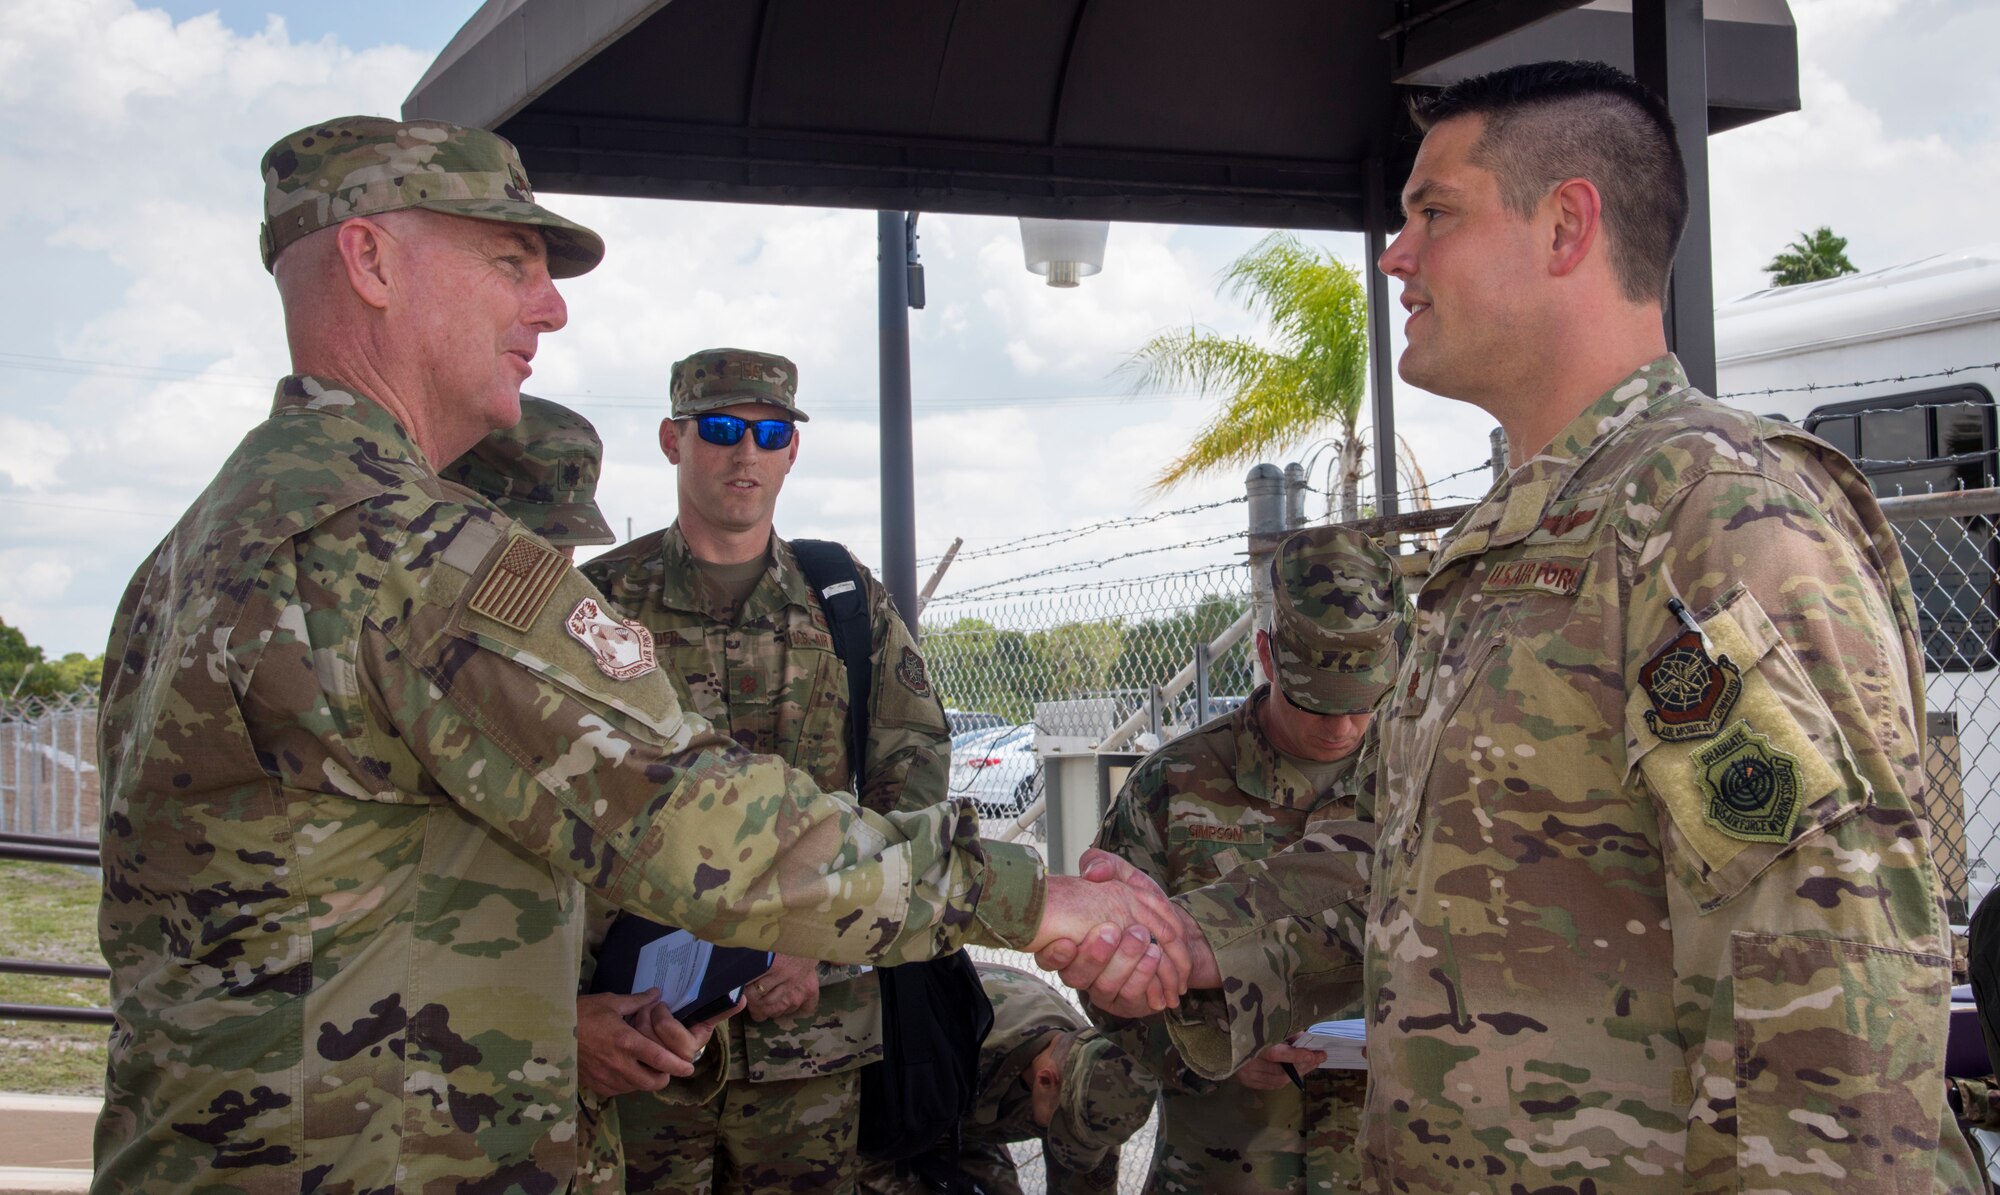 U.S. Air Force Maj. Gen. Sam Barrett, the 18th Air Force commander from Scott Air Force Base, Ill., coins Maj. Benjamin Hedges, the 6th Operations Support Squadron combat support flight commander, at MacDill AFB, Fla., May 9, 2019.